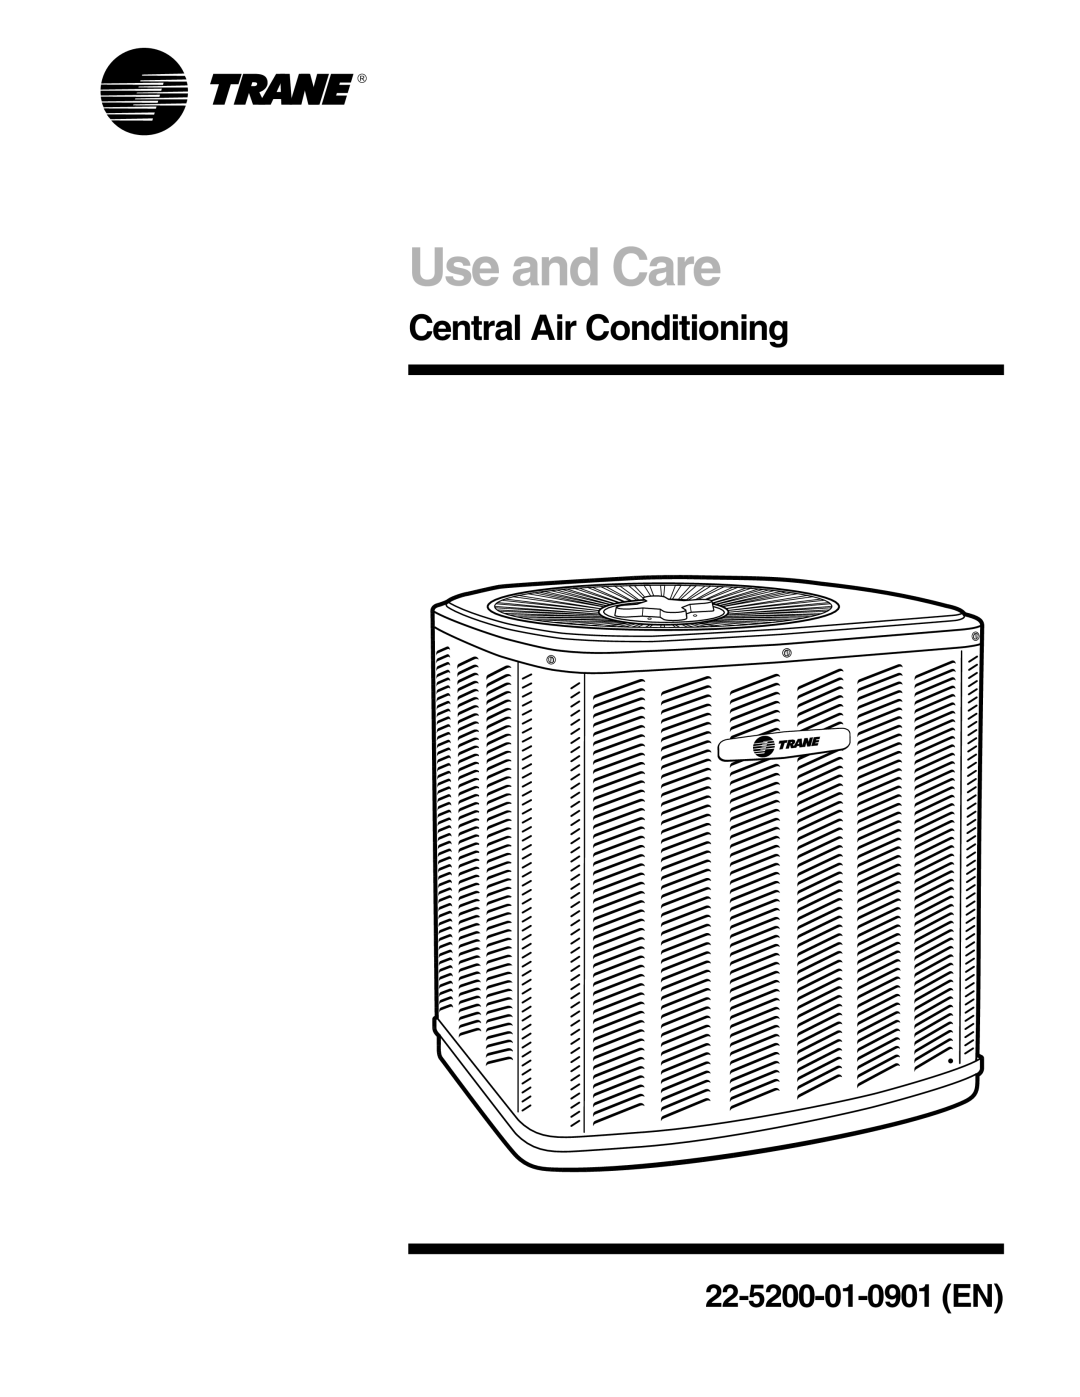 Trane 22-5200-01-0901 (EN) manual Central Air Conditioning, Use and Care, 22-5200-01-0901EN 